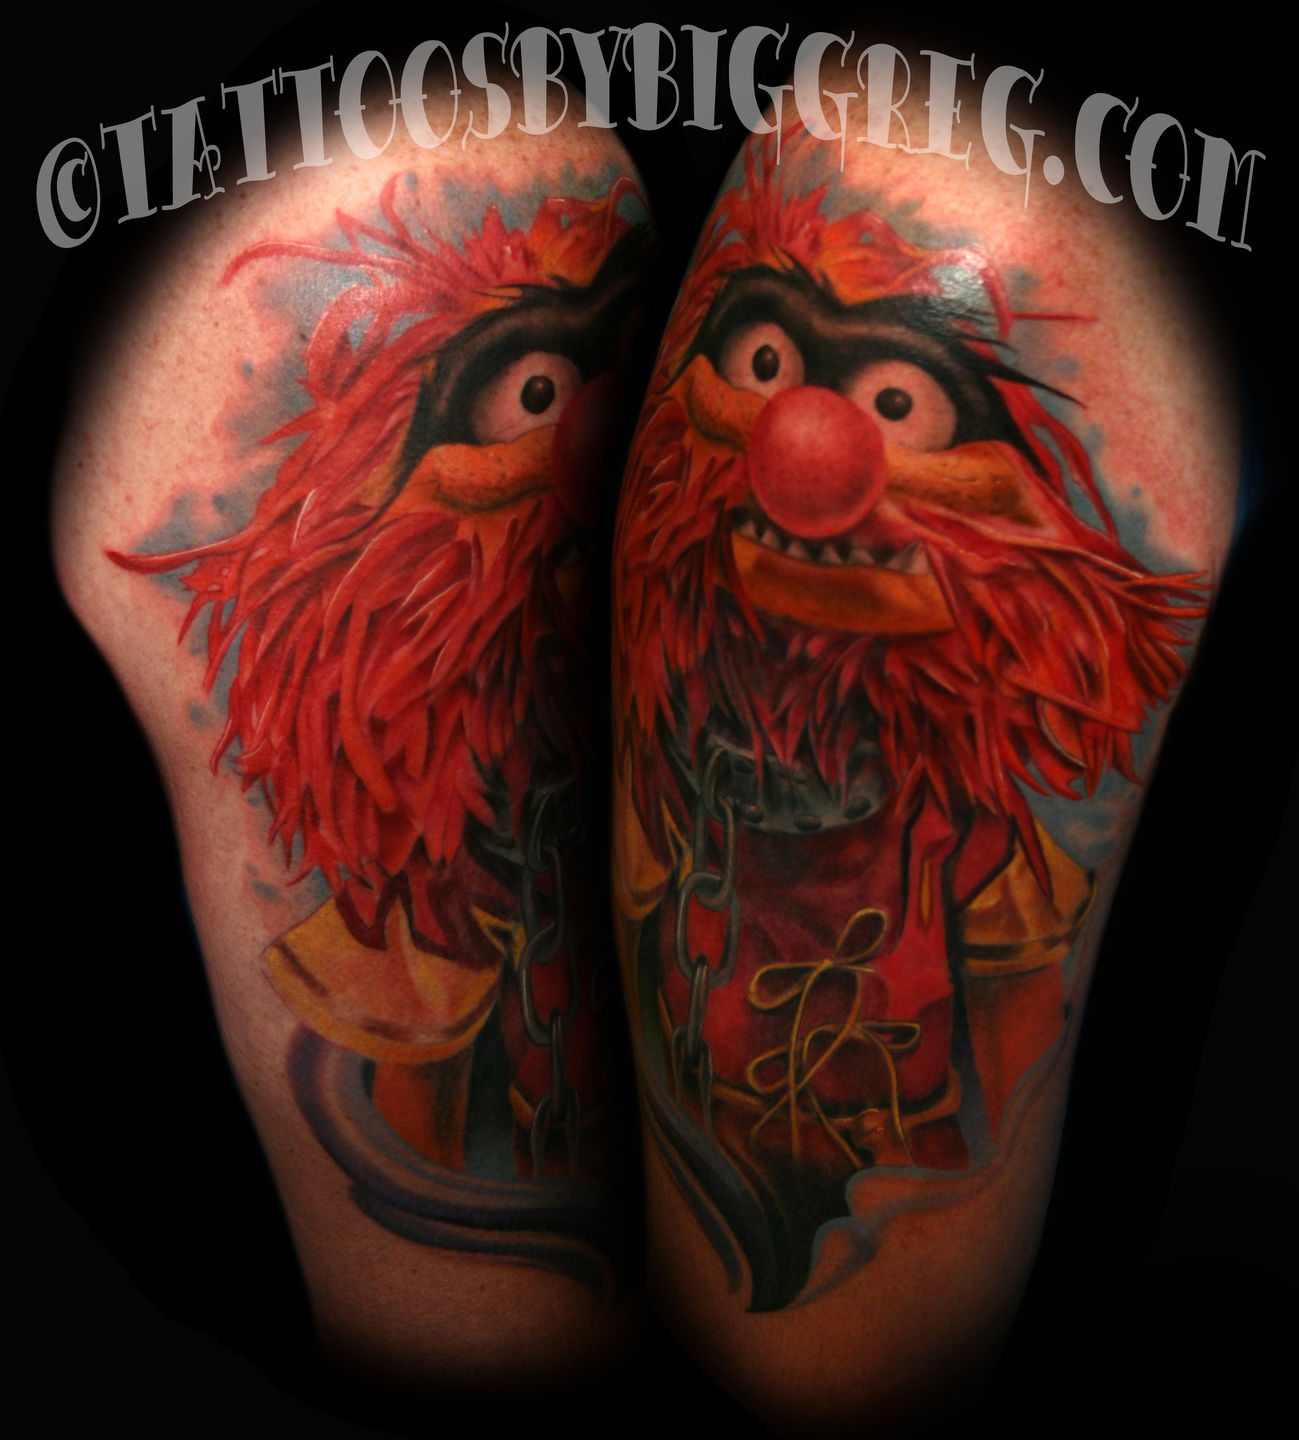 Ugliest Tattoos  muppets  Bad tattoos of horrible fail situations that  are permanent and on your body  funny tattoos  bad tattoos  horrible  tattoos  tattoo fail  Cheezburger